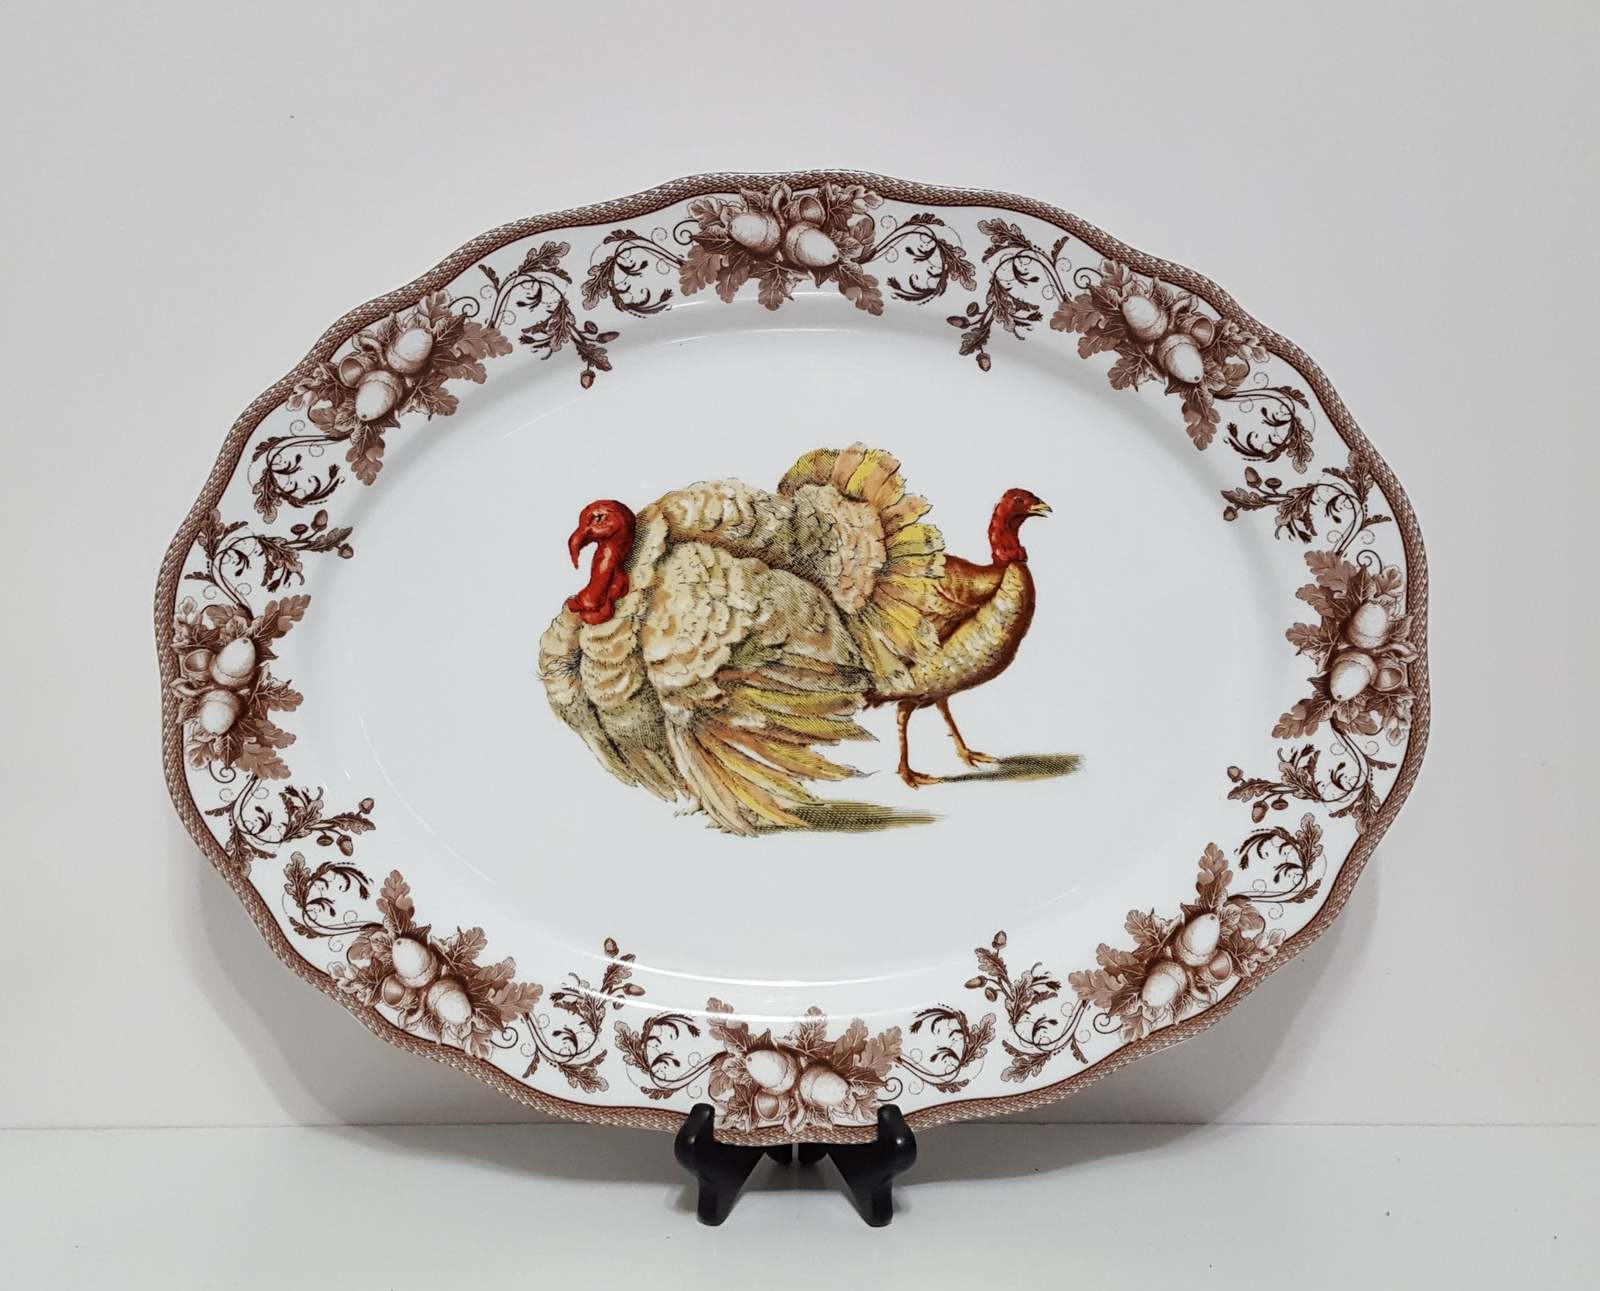 Primary image for NEW RARE Williams Sonoma Large Oval Turkey Serving Platter 20" x 15.5" Porcelain